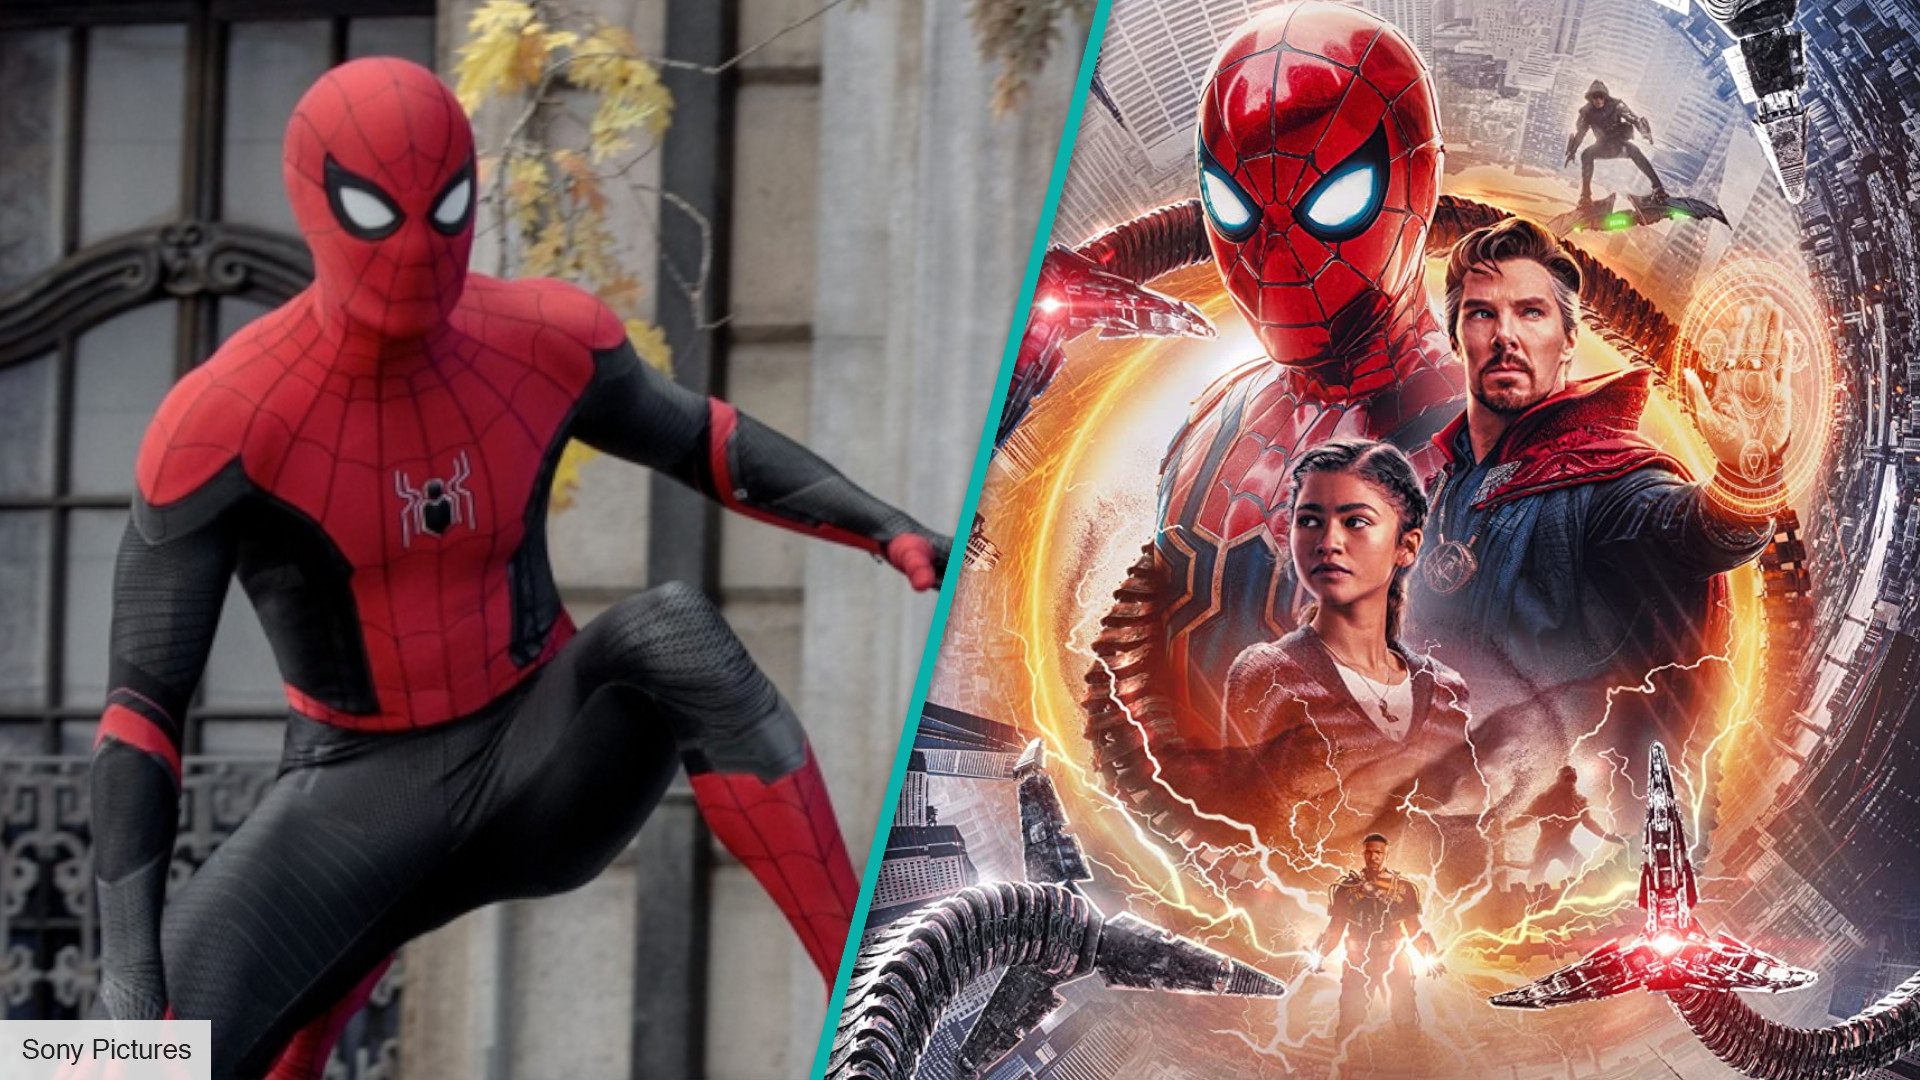 Spider-Man: No Way Home opens to 100% on Rotten Tomatoes | The Digital Fix